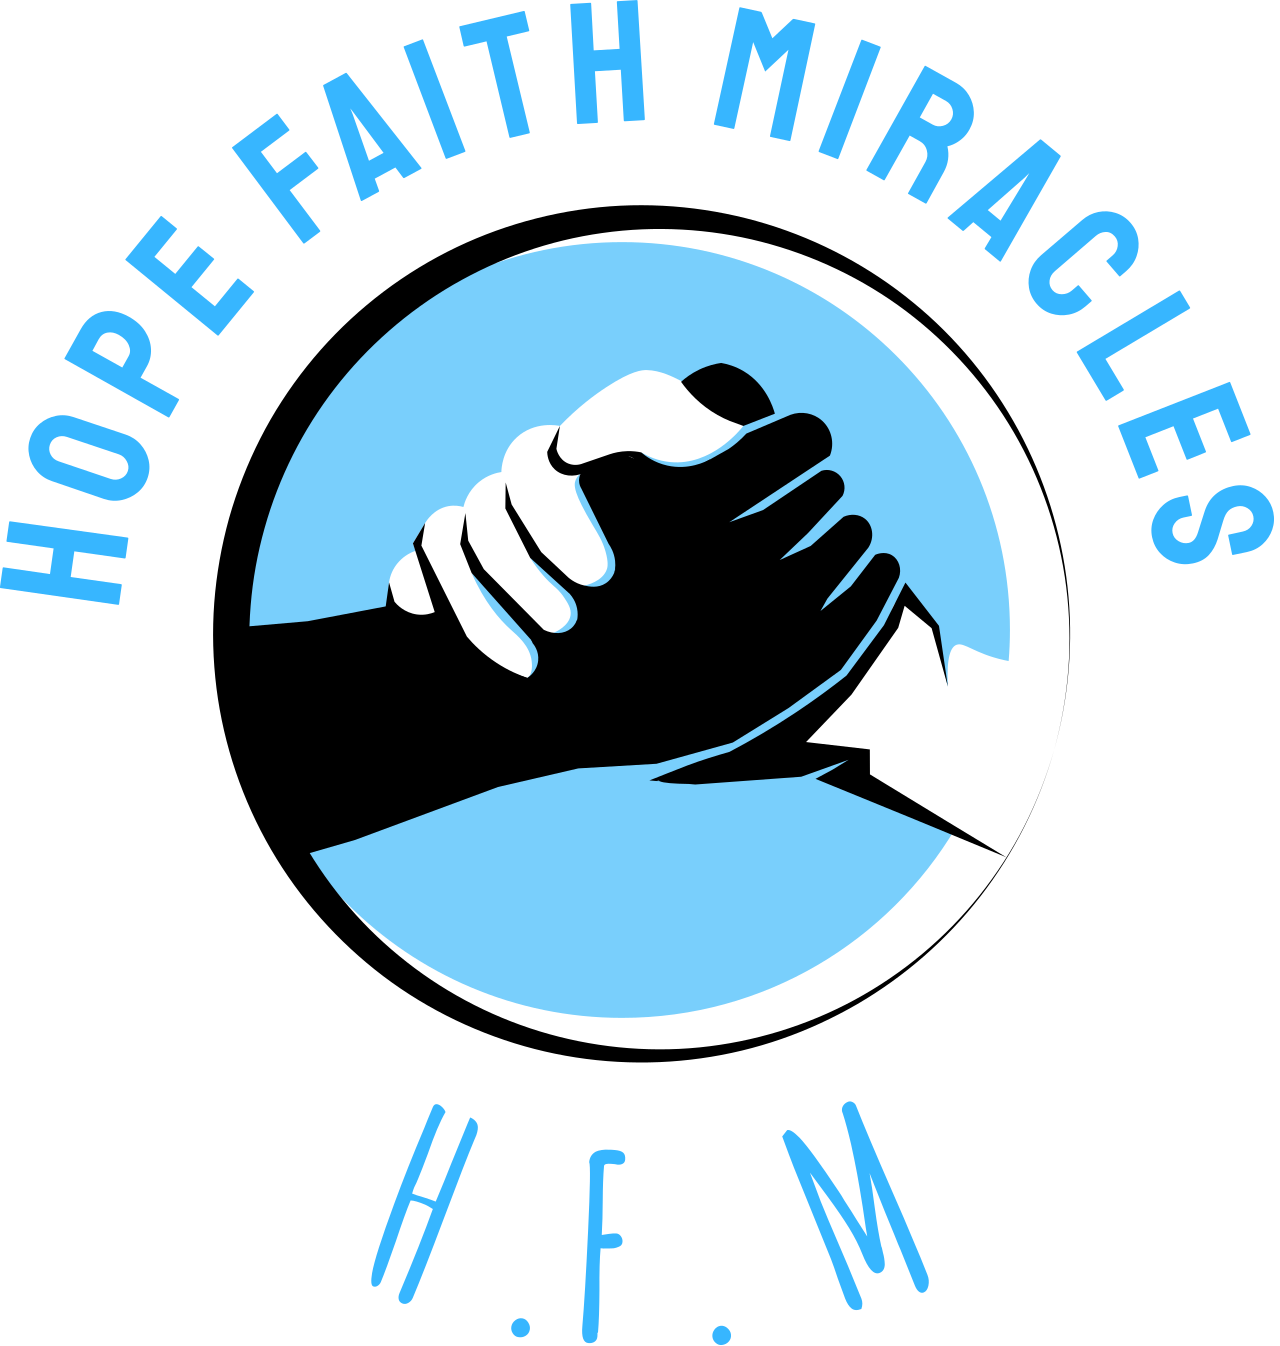 HOPE FAITH MIRACLES 's web page